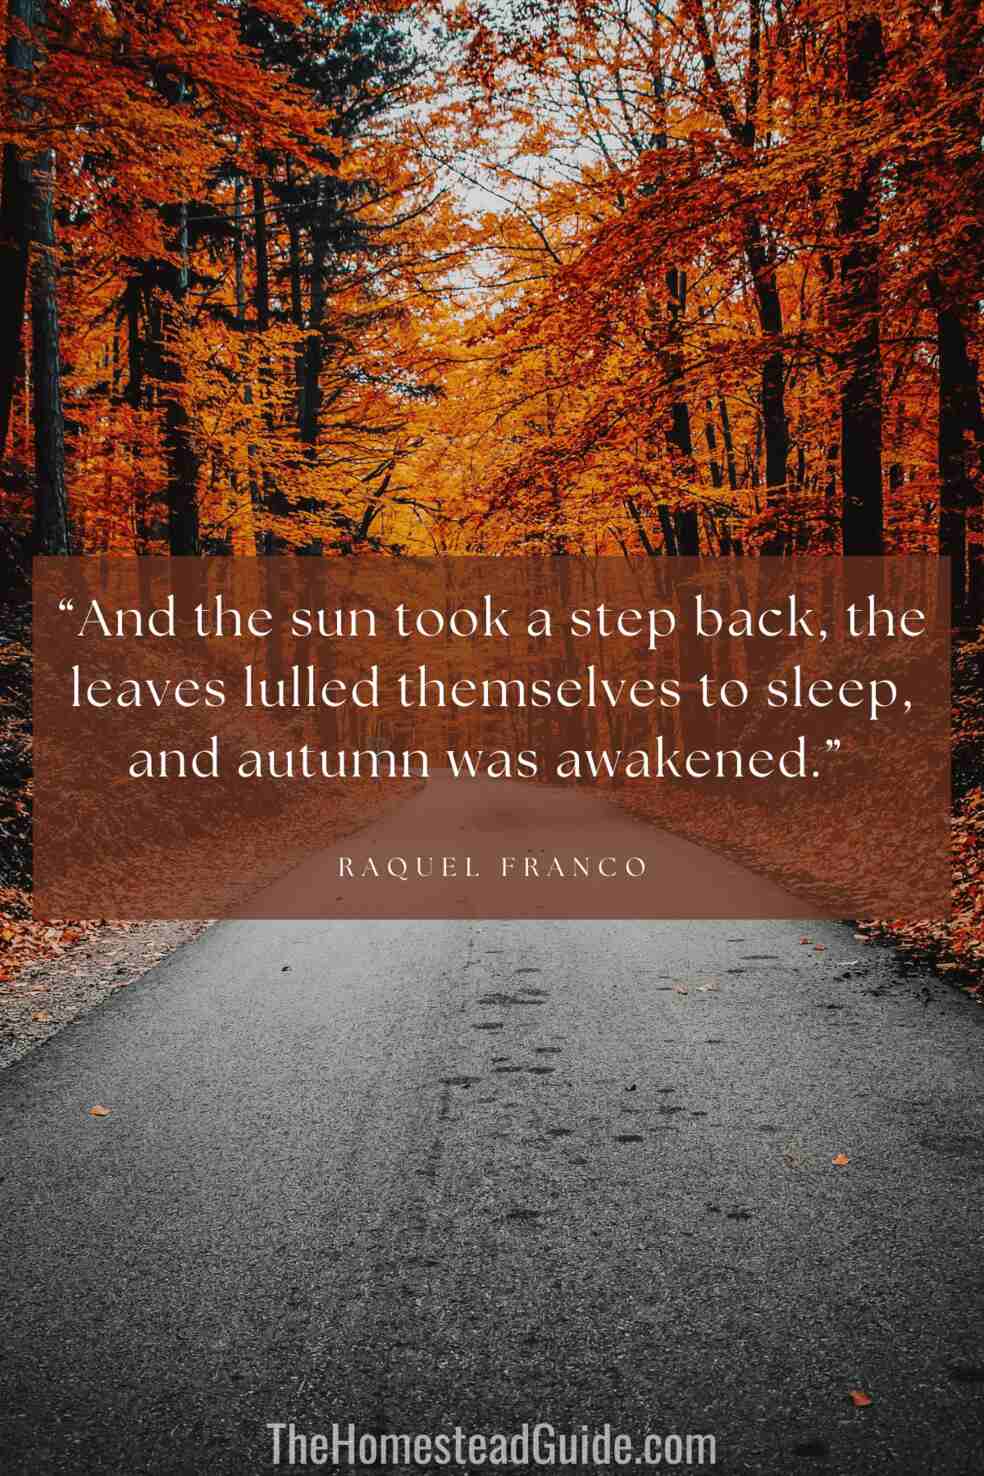 And the sun took a step back, the leaves lulled themselves to sleep, and autumn was awakened.